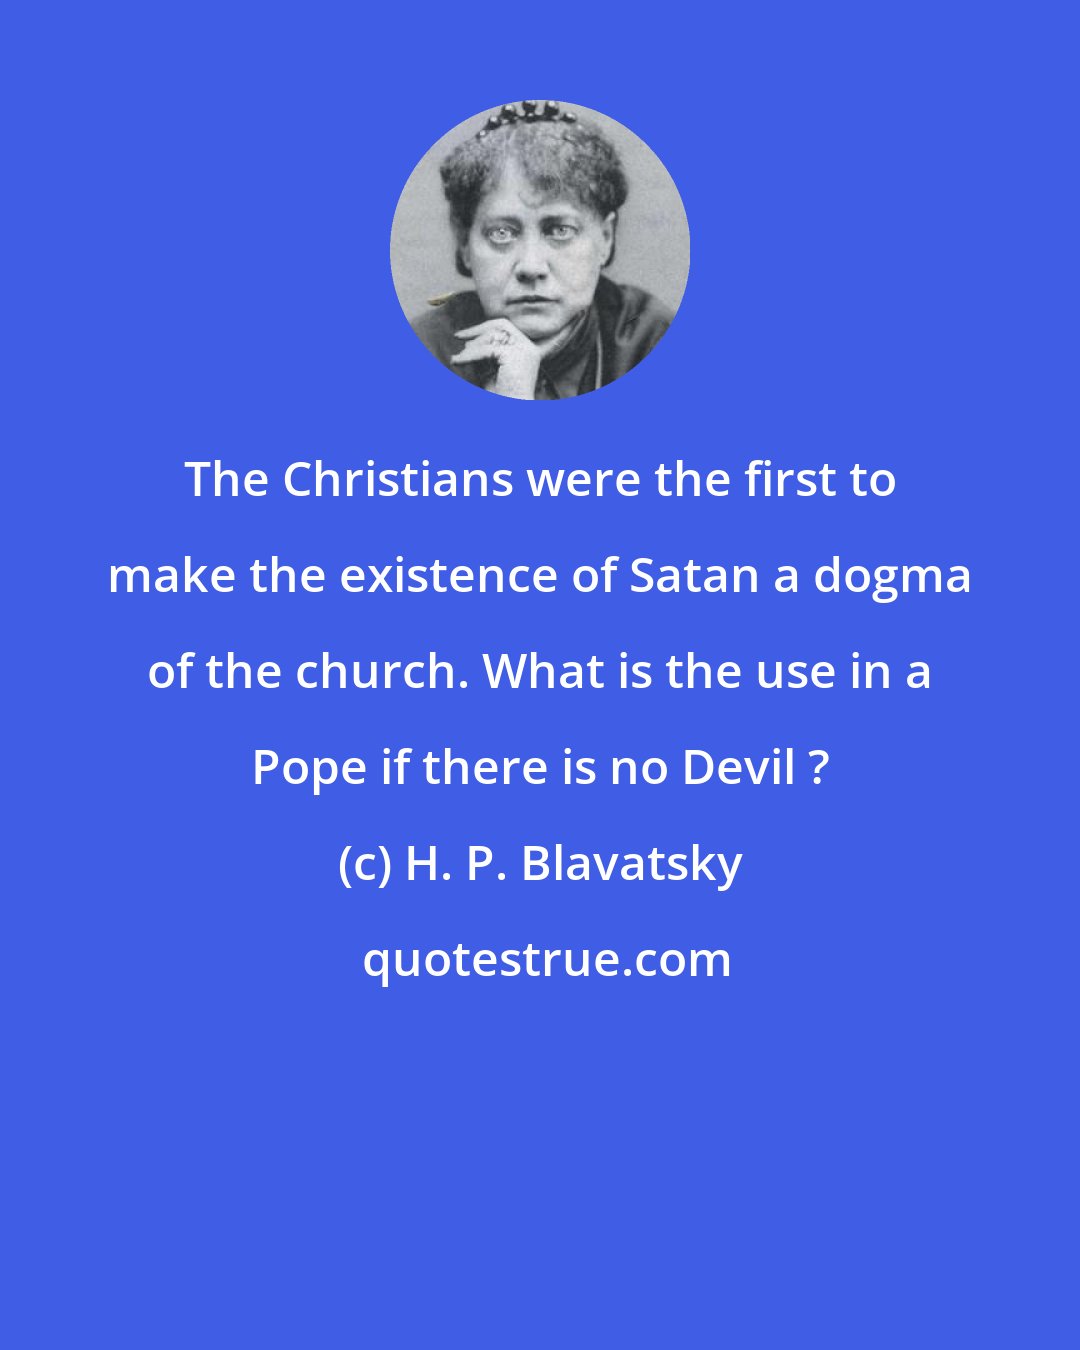 H. P. Blavatsky: The Christians were the first to make the existence of Satan a dogma of the church. What is the use in a Pope if there is no Devil ?